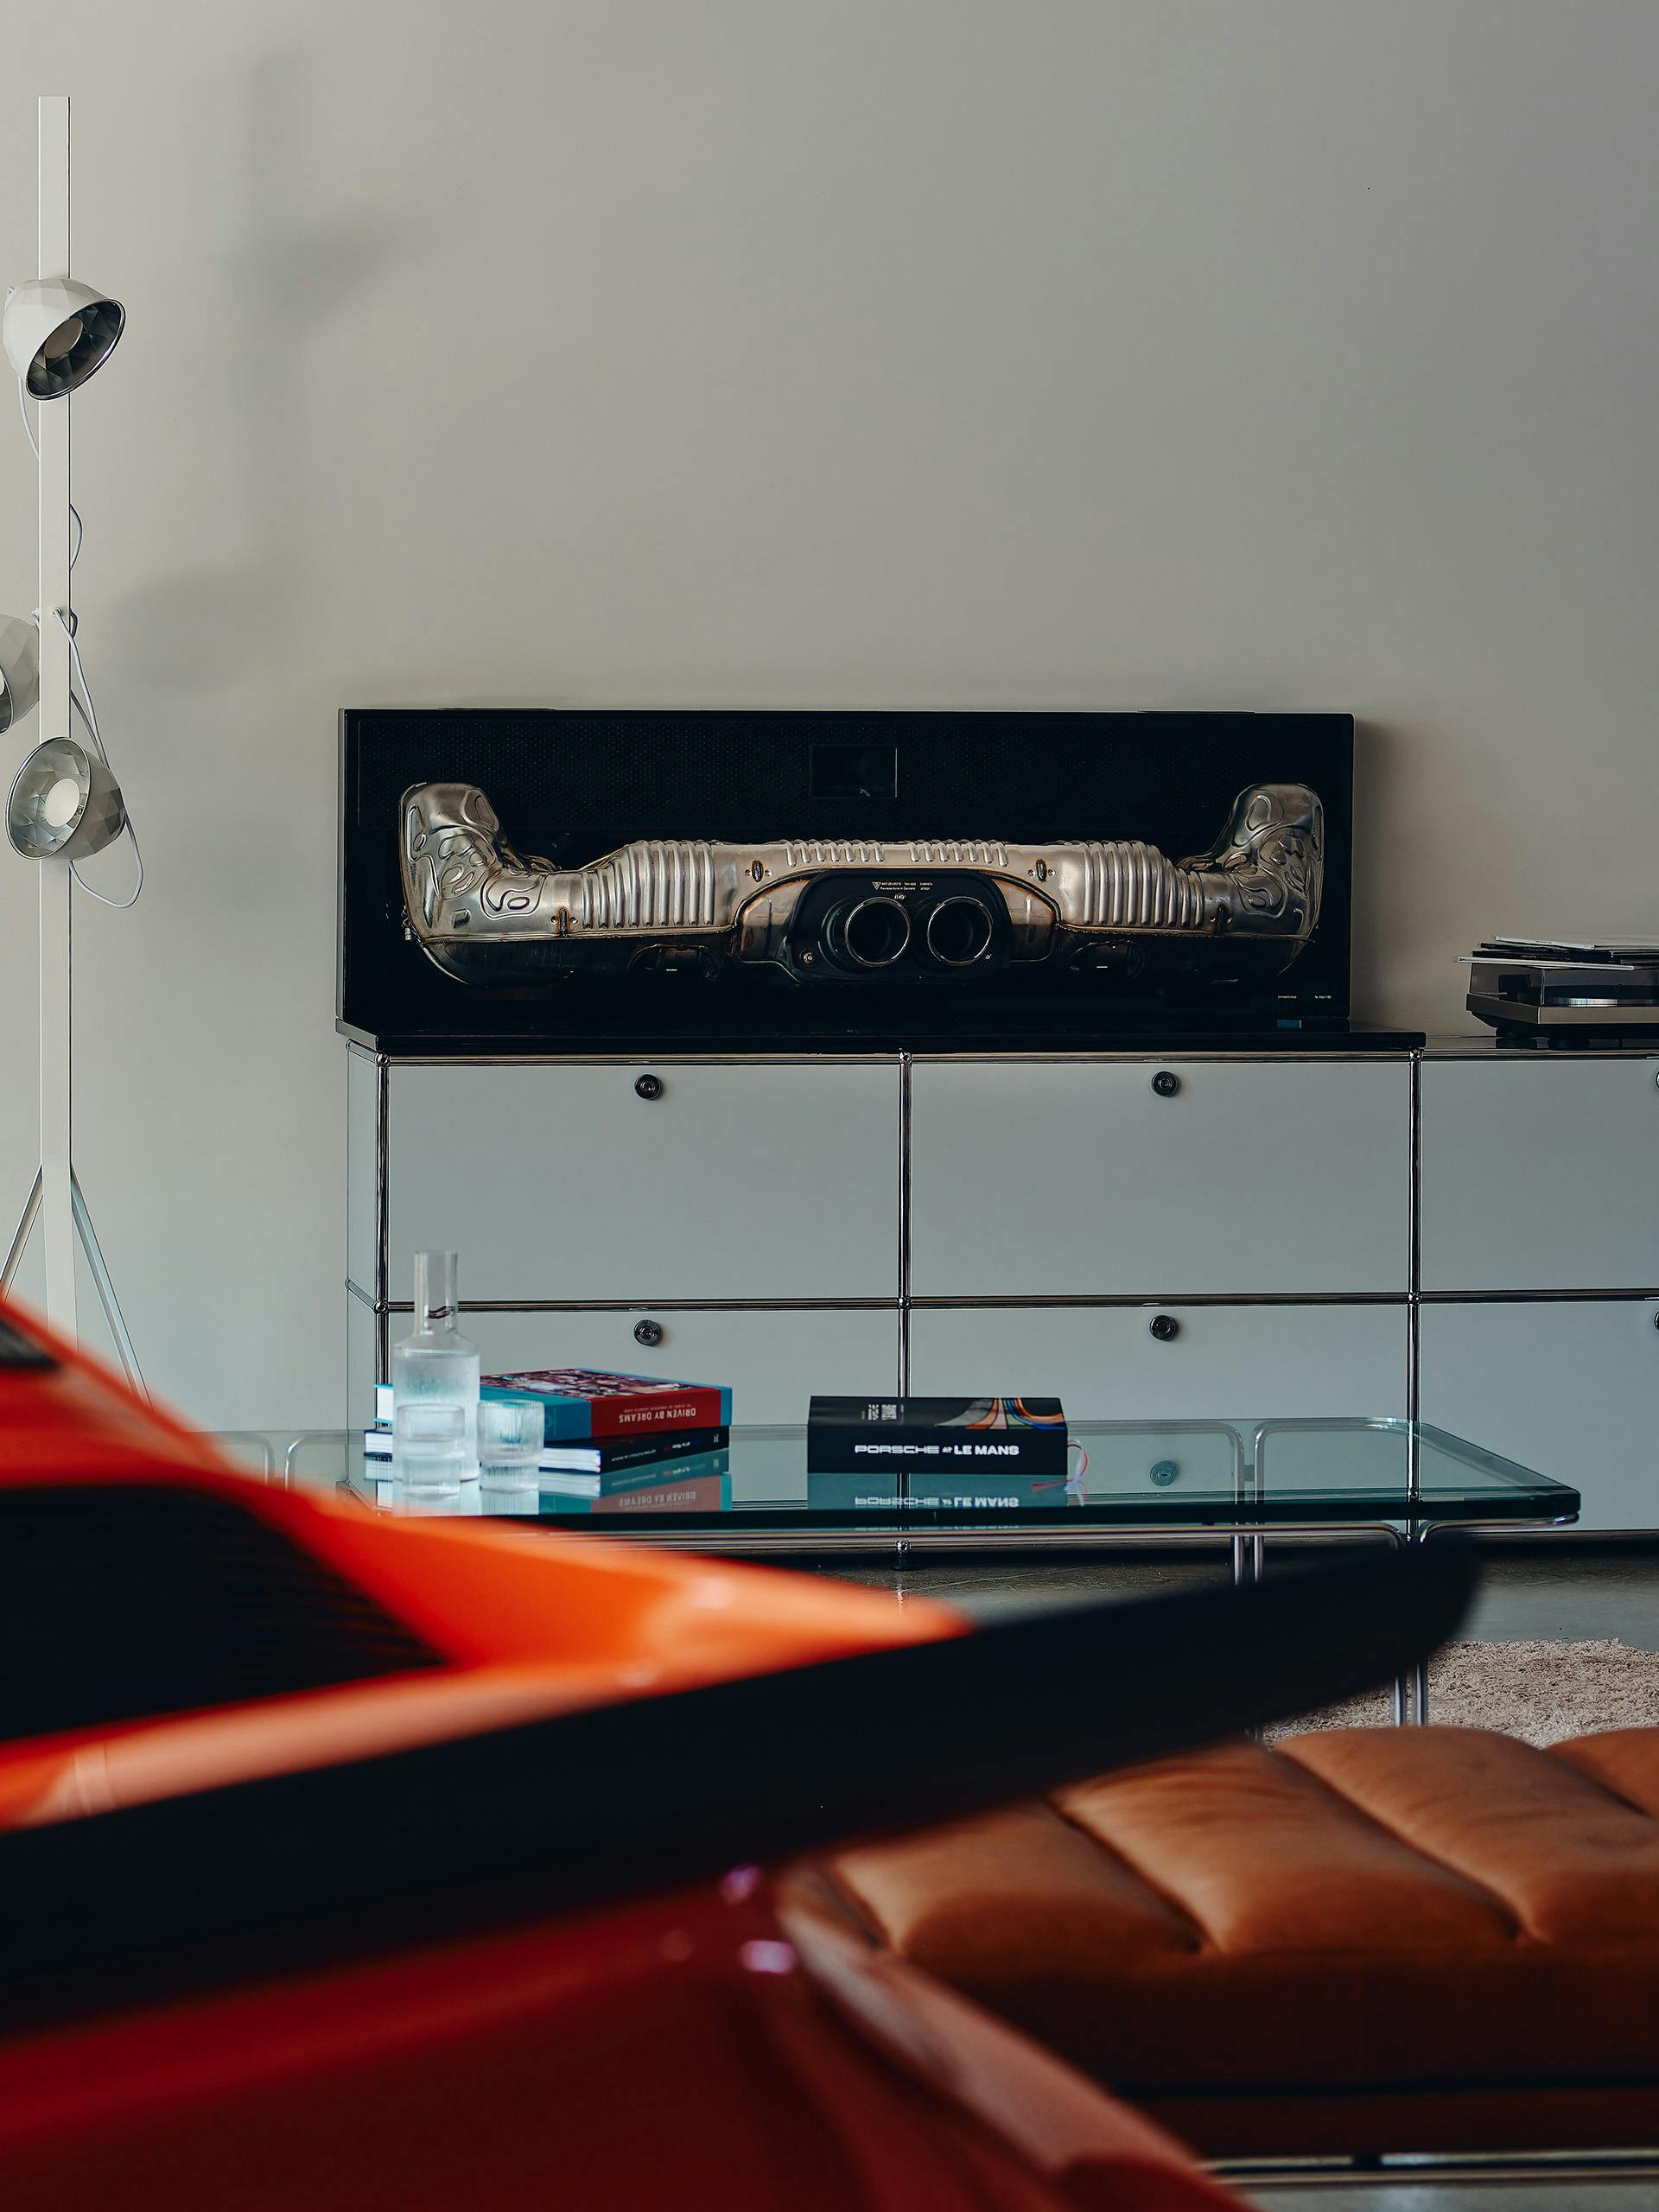 Shown is a soundbar from Porsche hanging on the wall.